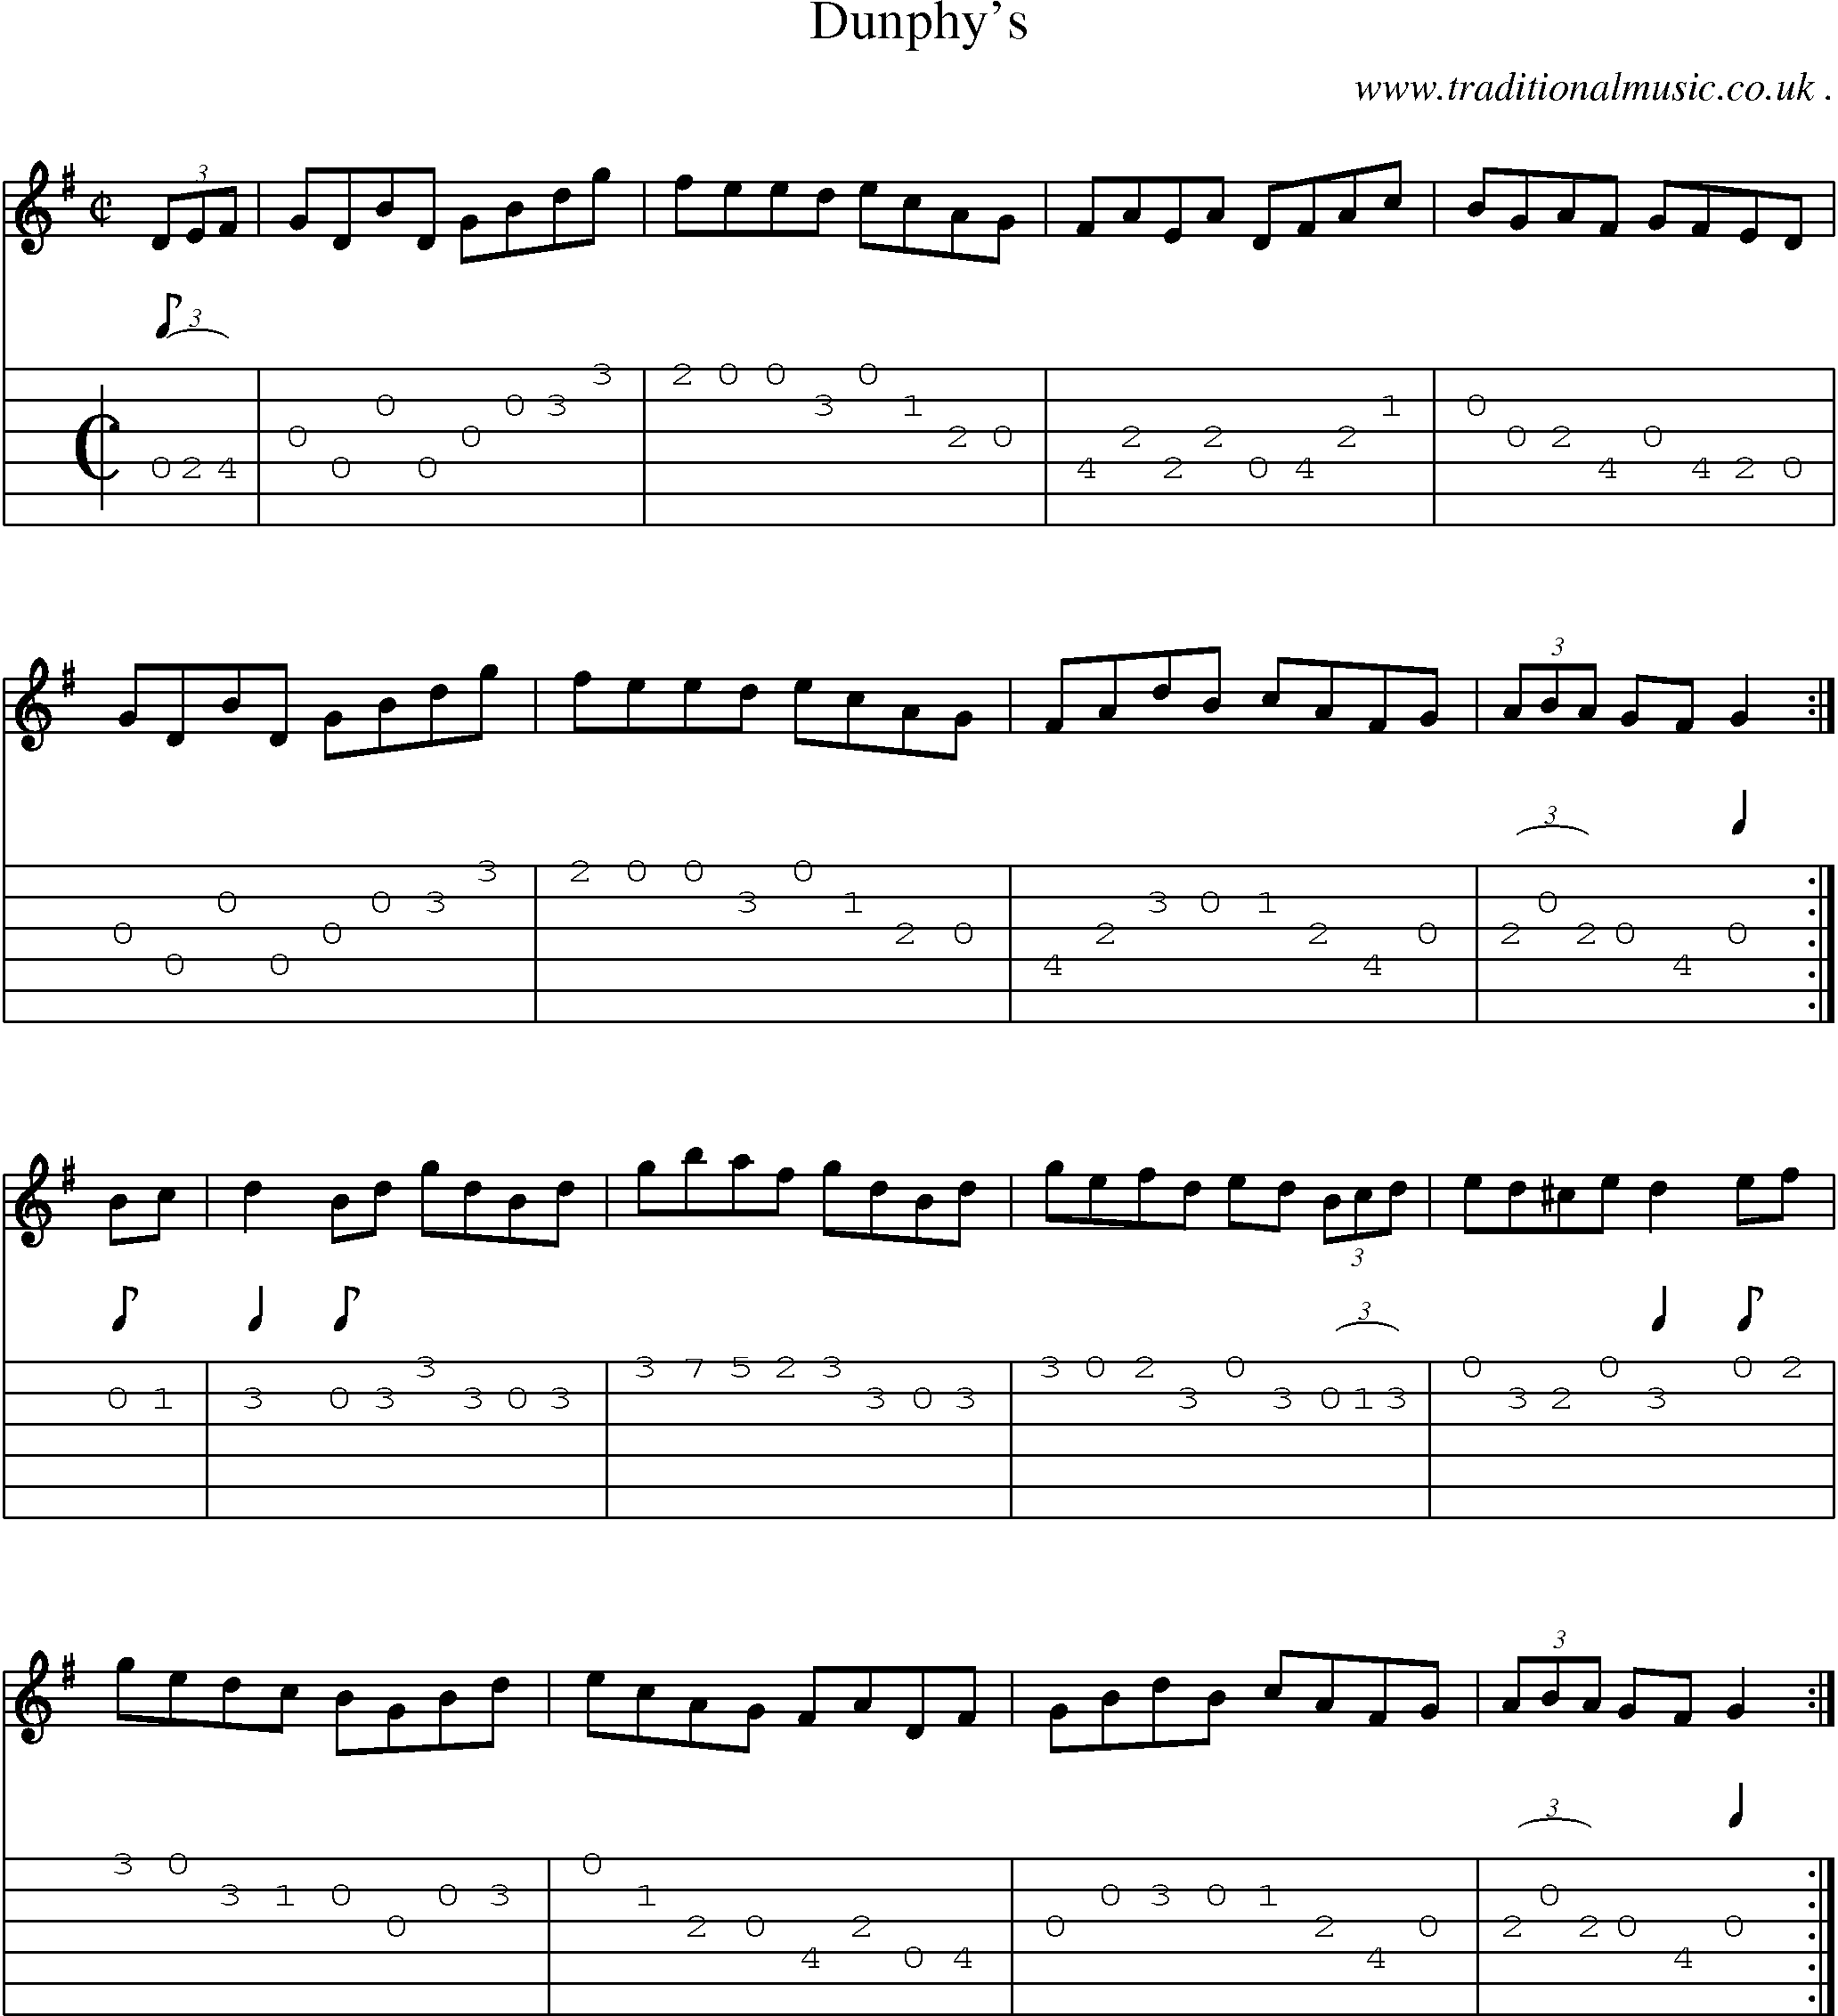 Sheet-Music and Guitar Tabs for Dunphys